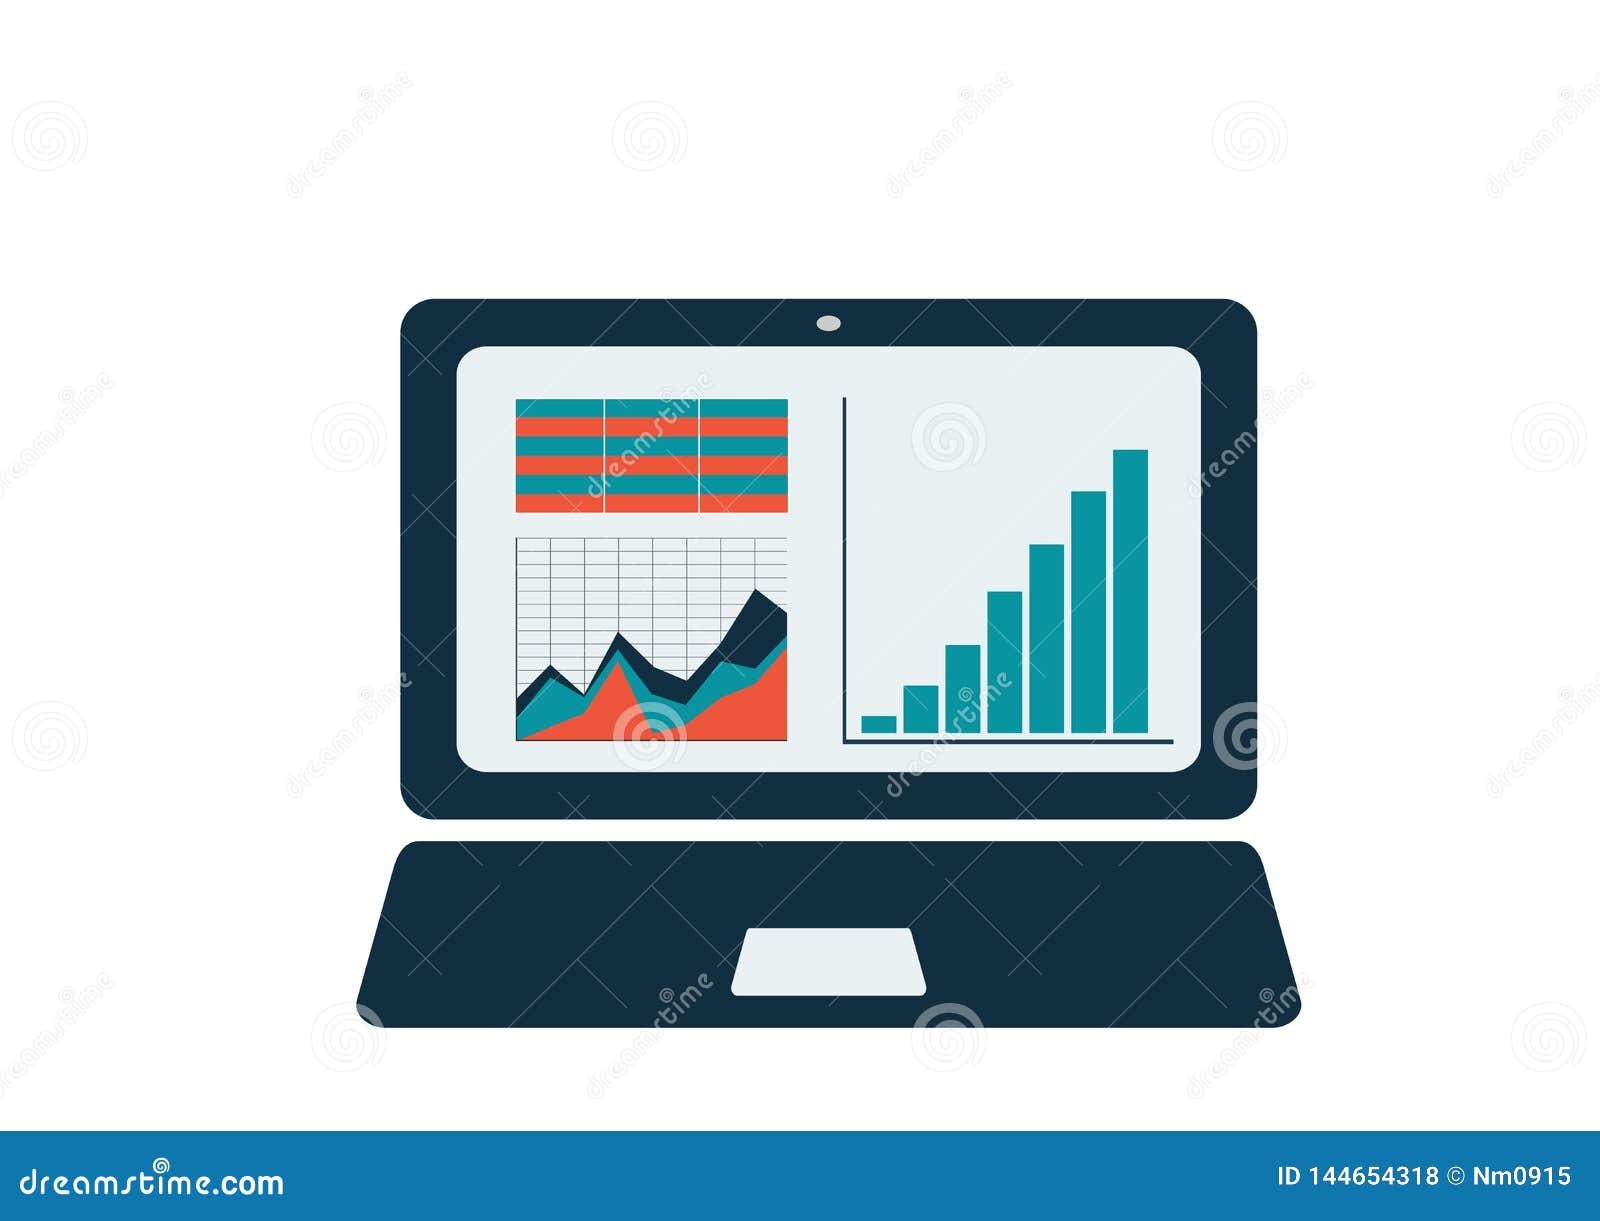 Laptop With Charts  Diagram And Table On The Screen Stock Vector